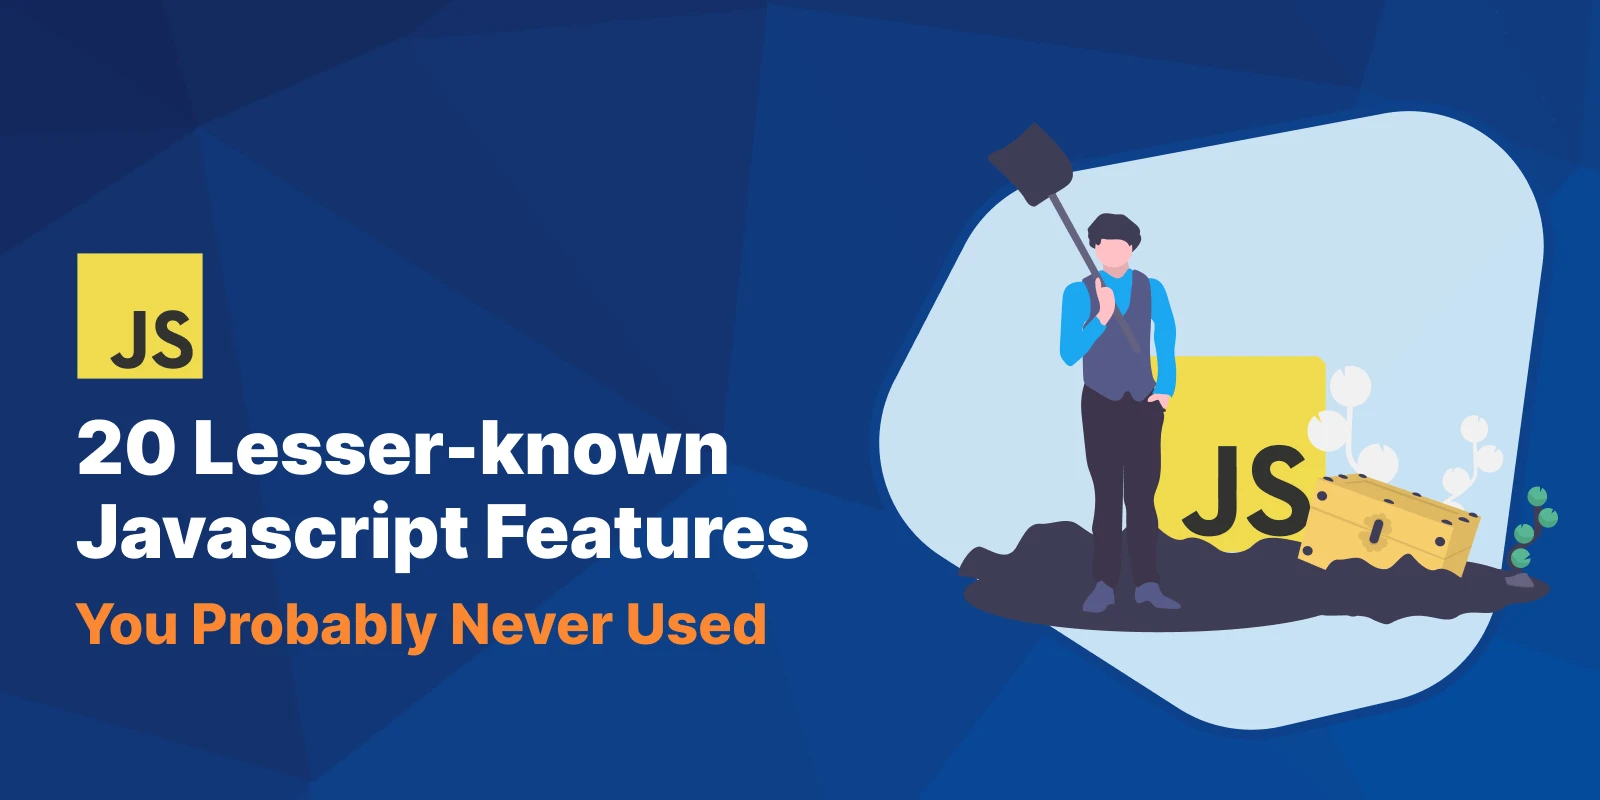 20 Lesser-known Javascript Features that You Probably Never Used